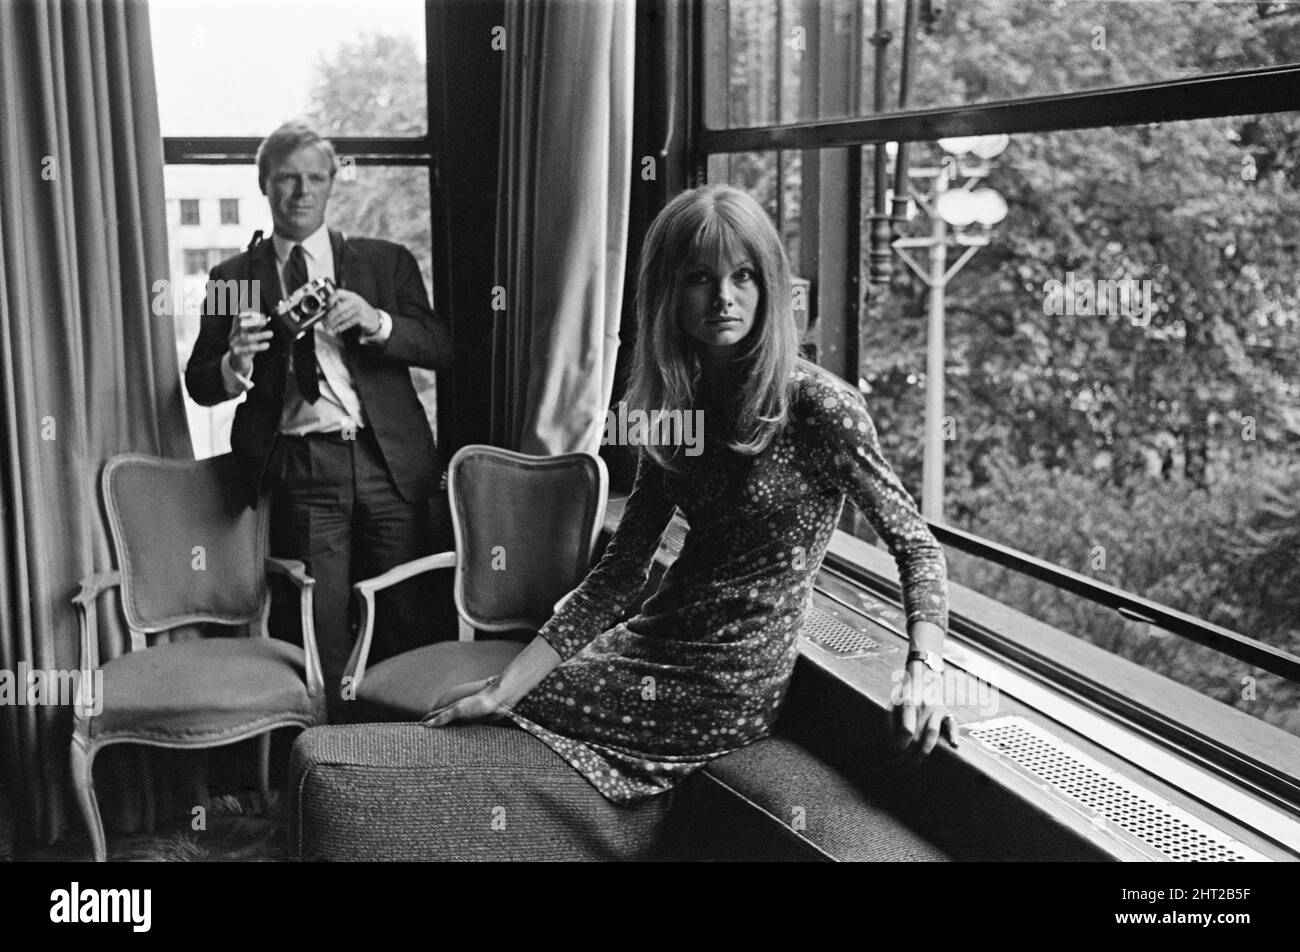 Jean Shrimpton, model and actor, pictured duringthe press announcement of 'Privilege', a film due out in 1967  Jean co stars with ex Manfred Man singer Paul Jones.  The story is presented as a narrated documentary, set in a near-future 1970s England, and concerning a disillusioned pop singer, Steven Shorter (Paul Jones), who is the most-loved celebrity in the country. His stage show involves him appearing on stage in a jail cell with handcuffs, beaten by police, to the horror and sympathy of the audience. It is described that the two main parties of England have formed a coalition government a Stock Photo